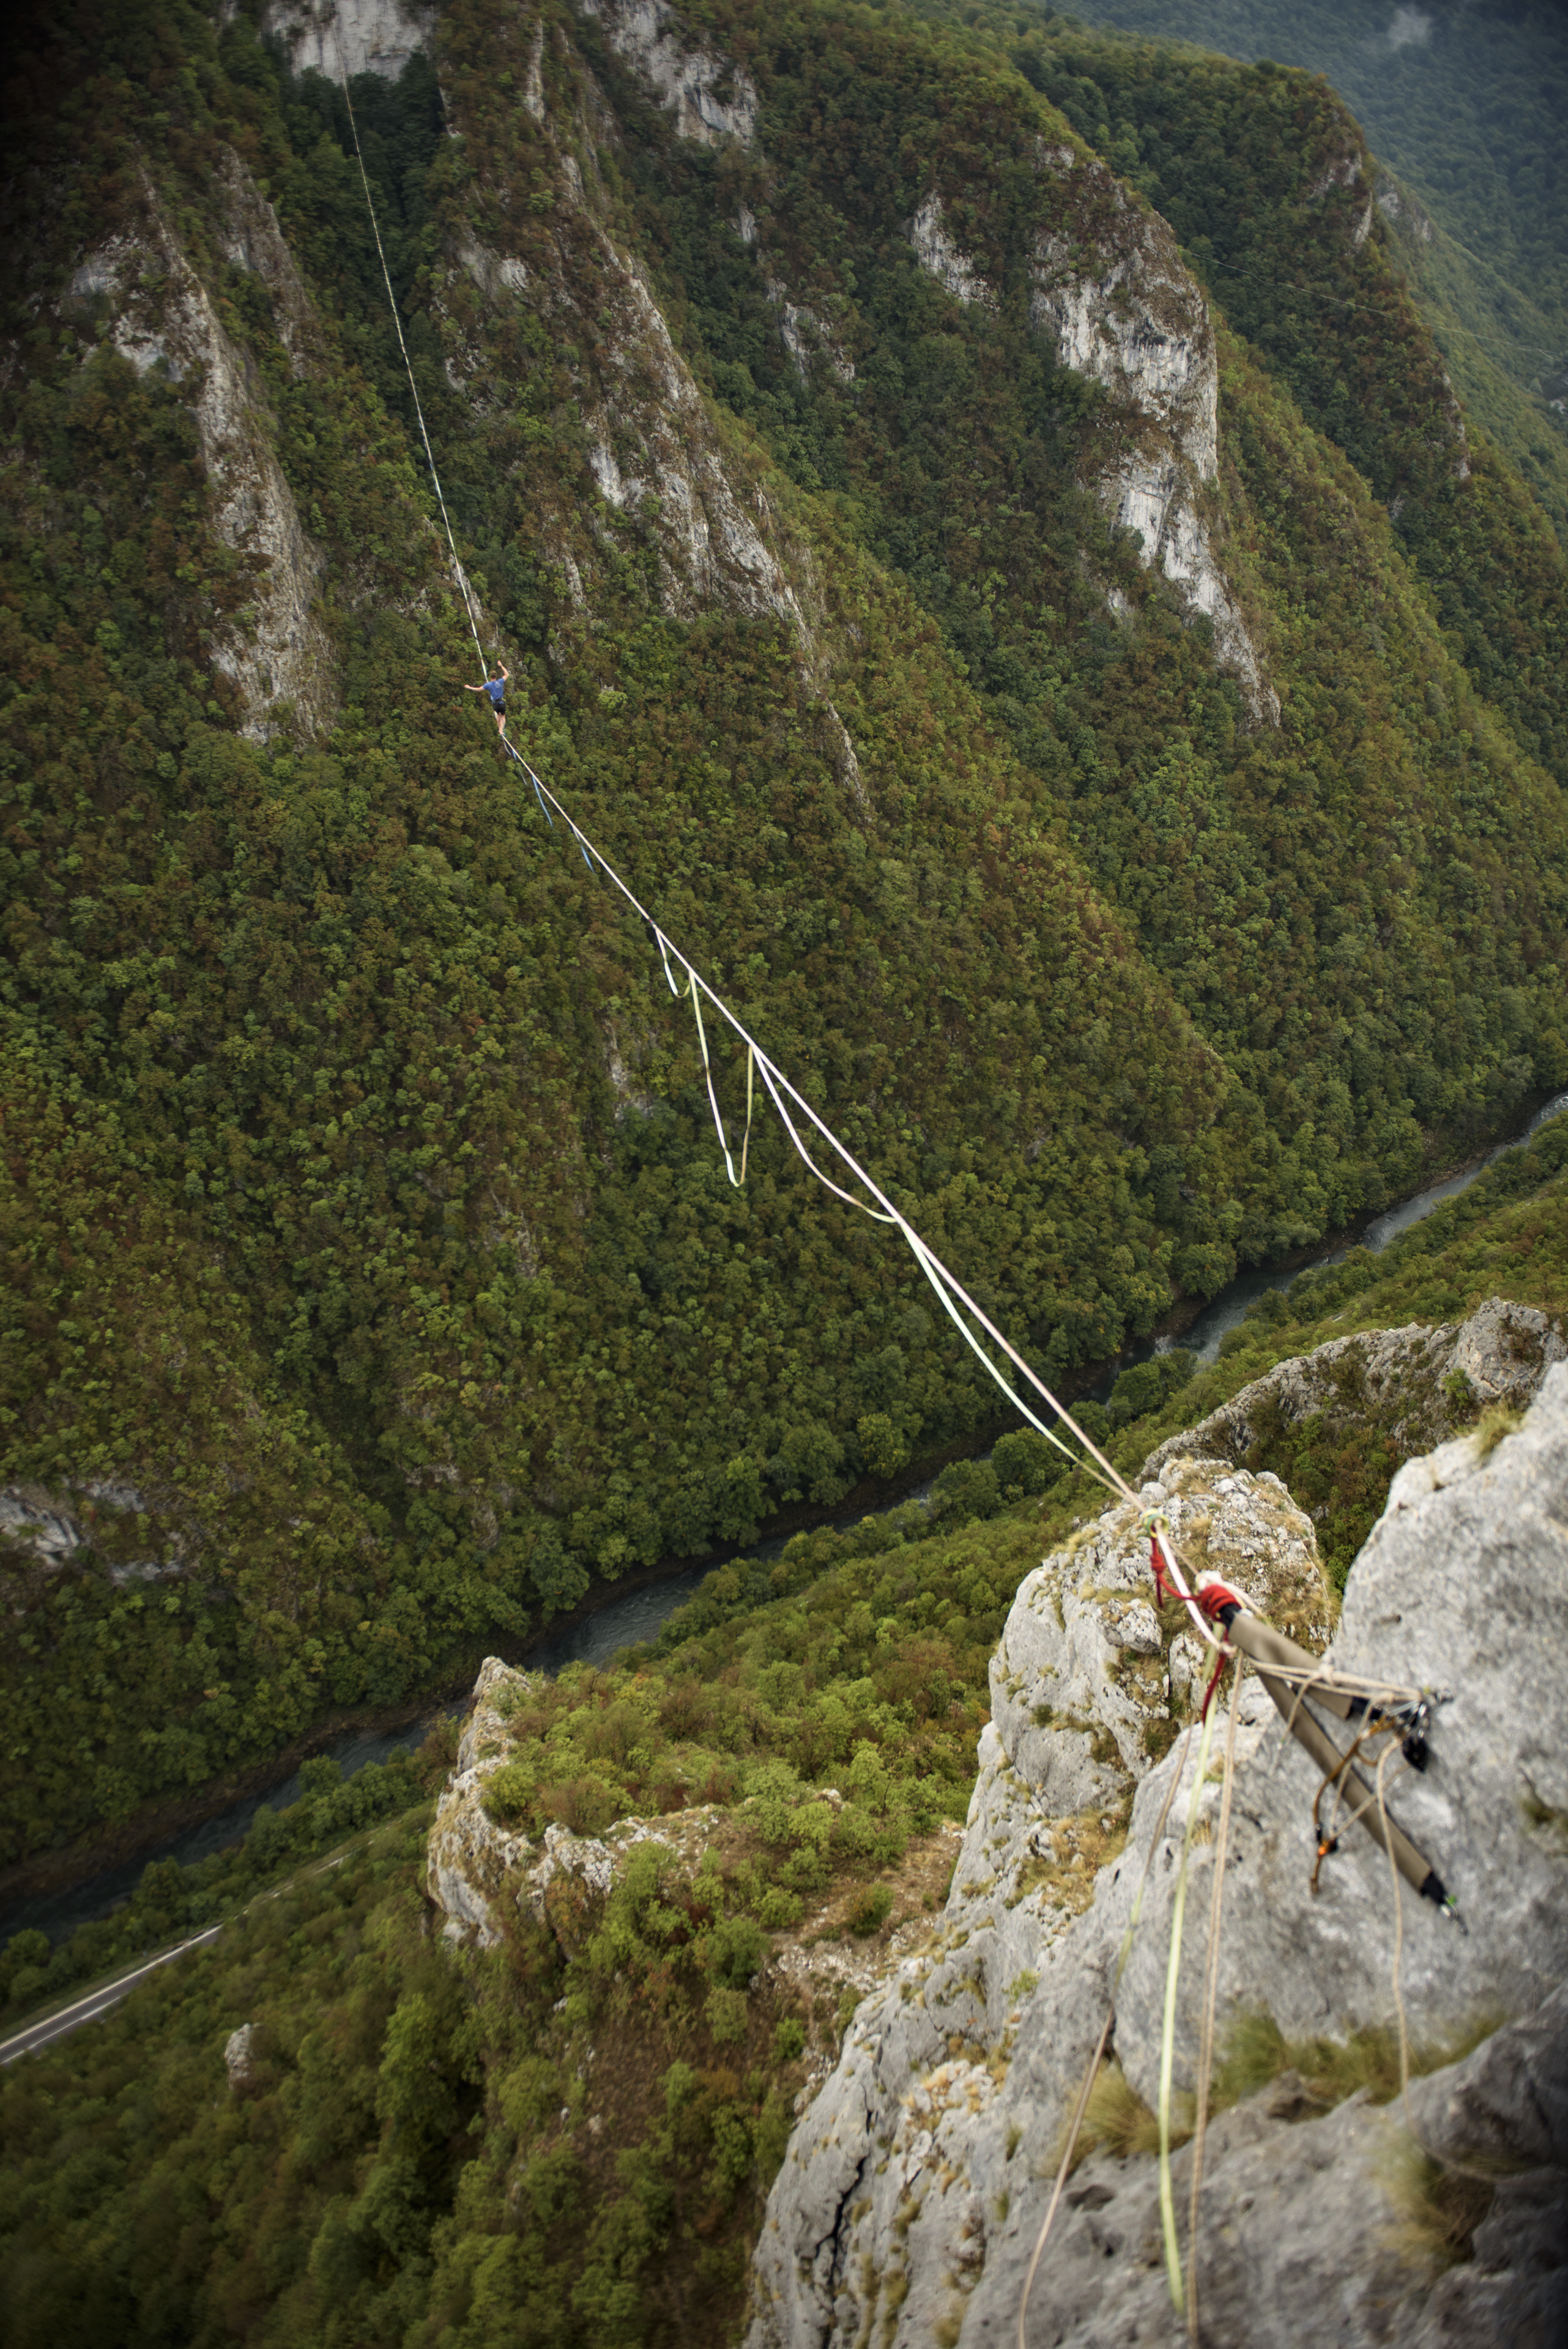 Highlining in Tijesno during the Drill & Chill festival